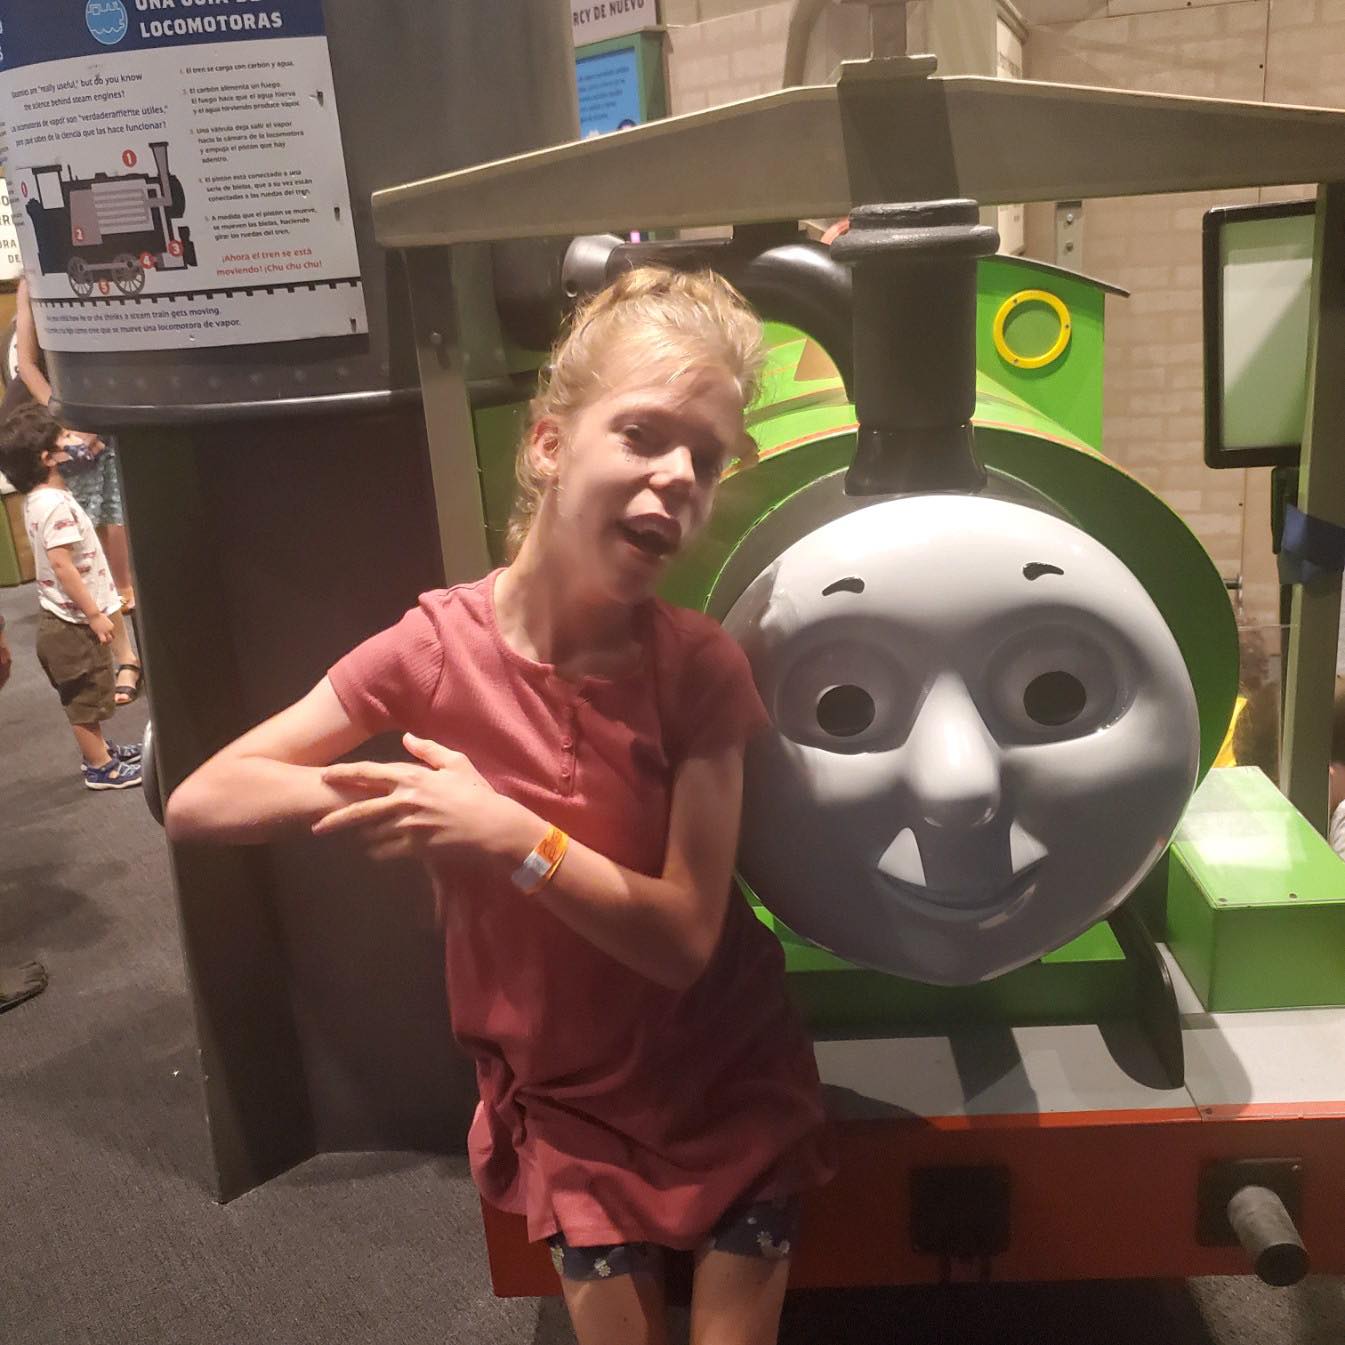 Thomas & Friends- Explore the Rails at Liberty Science Center a science museum in New Jersey